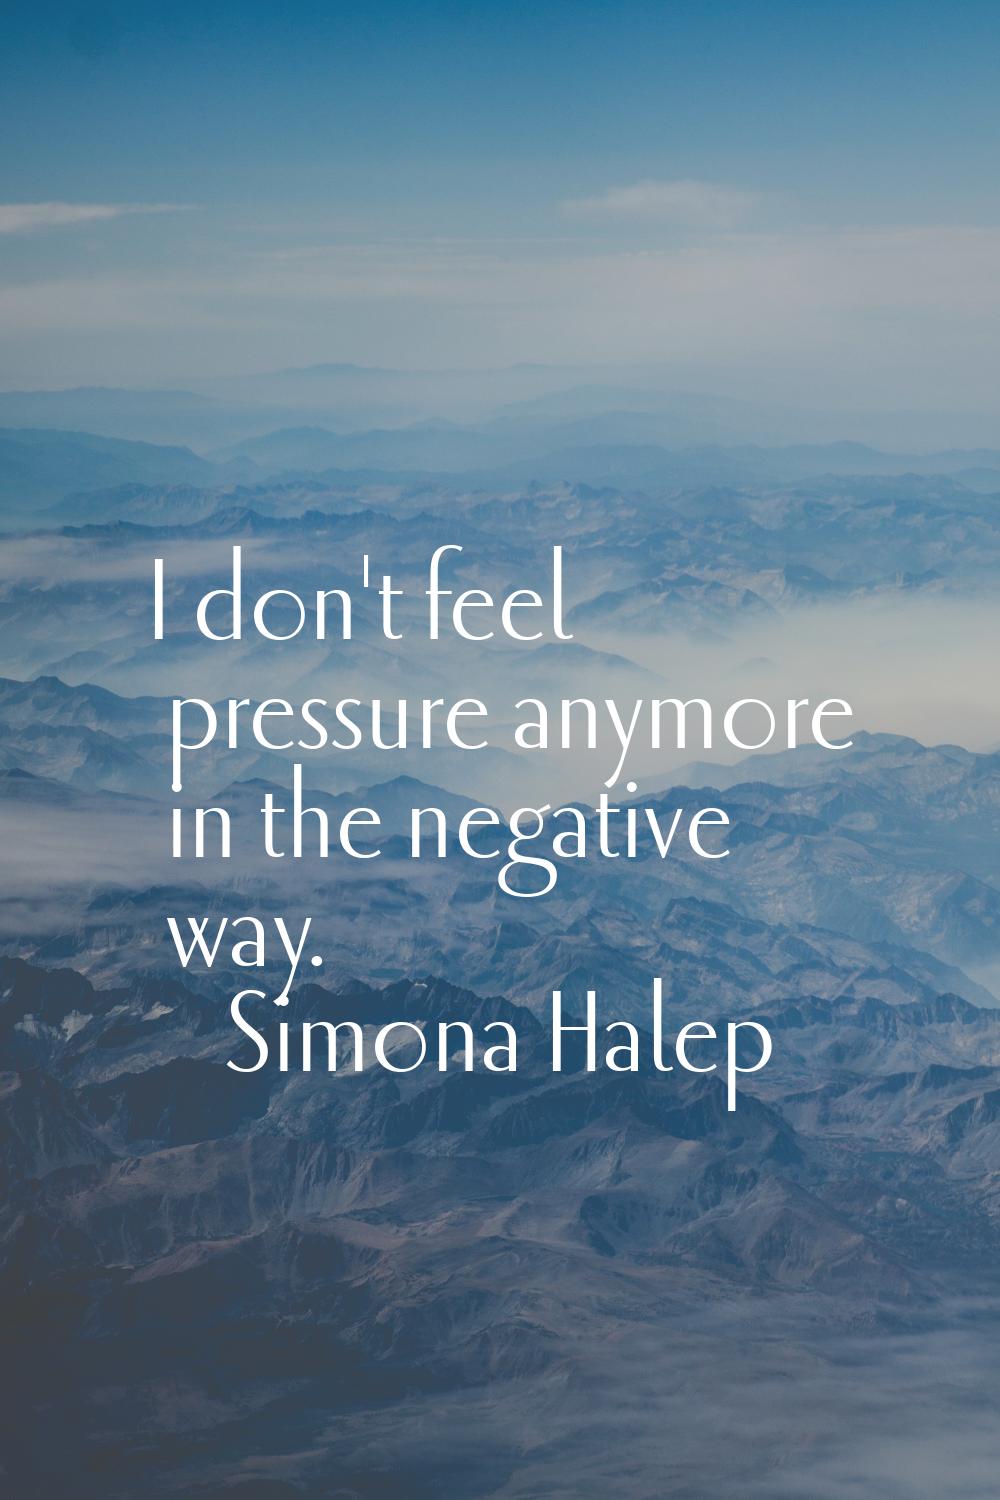 I don't feel pressure anymore in the negative way.